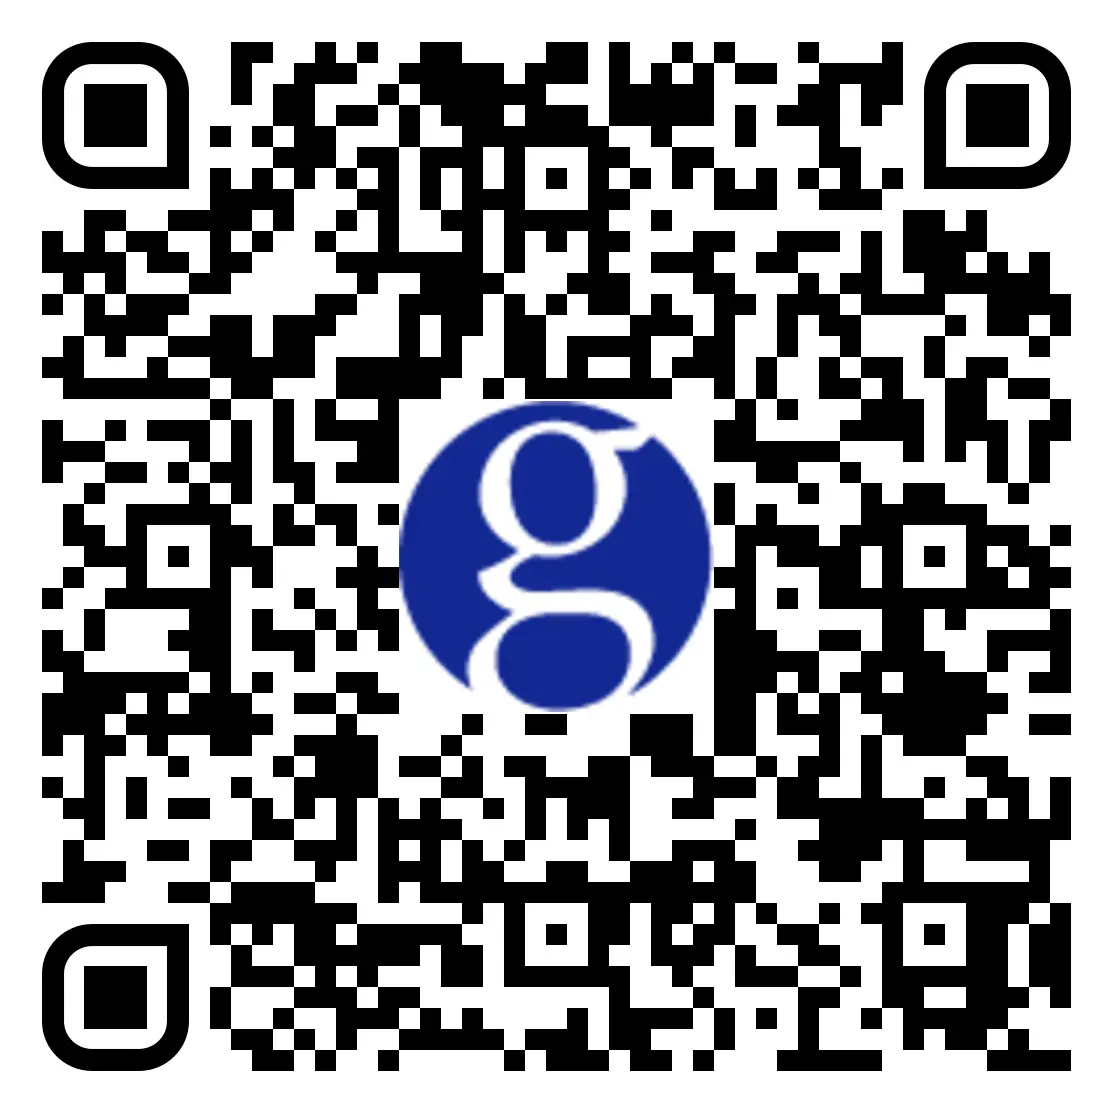 QR code for Gettysburg Healthcare Consulting